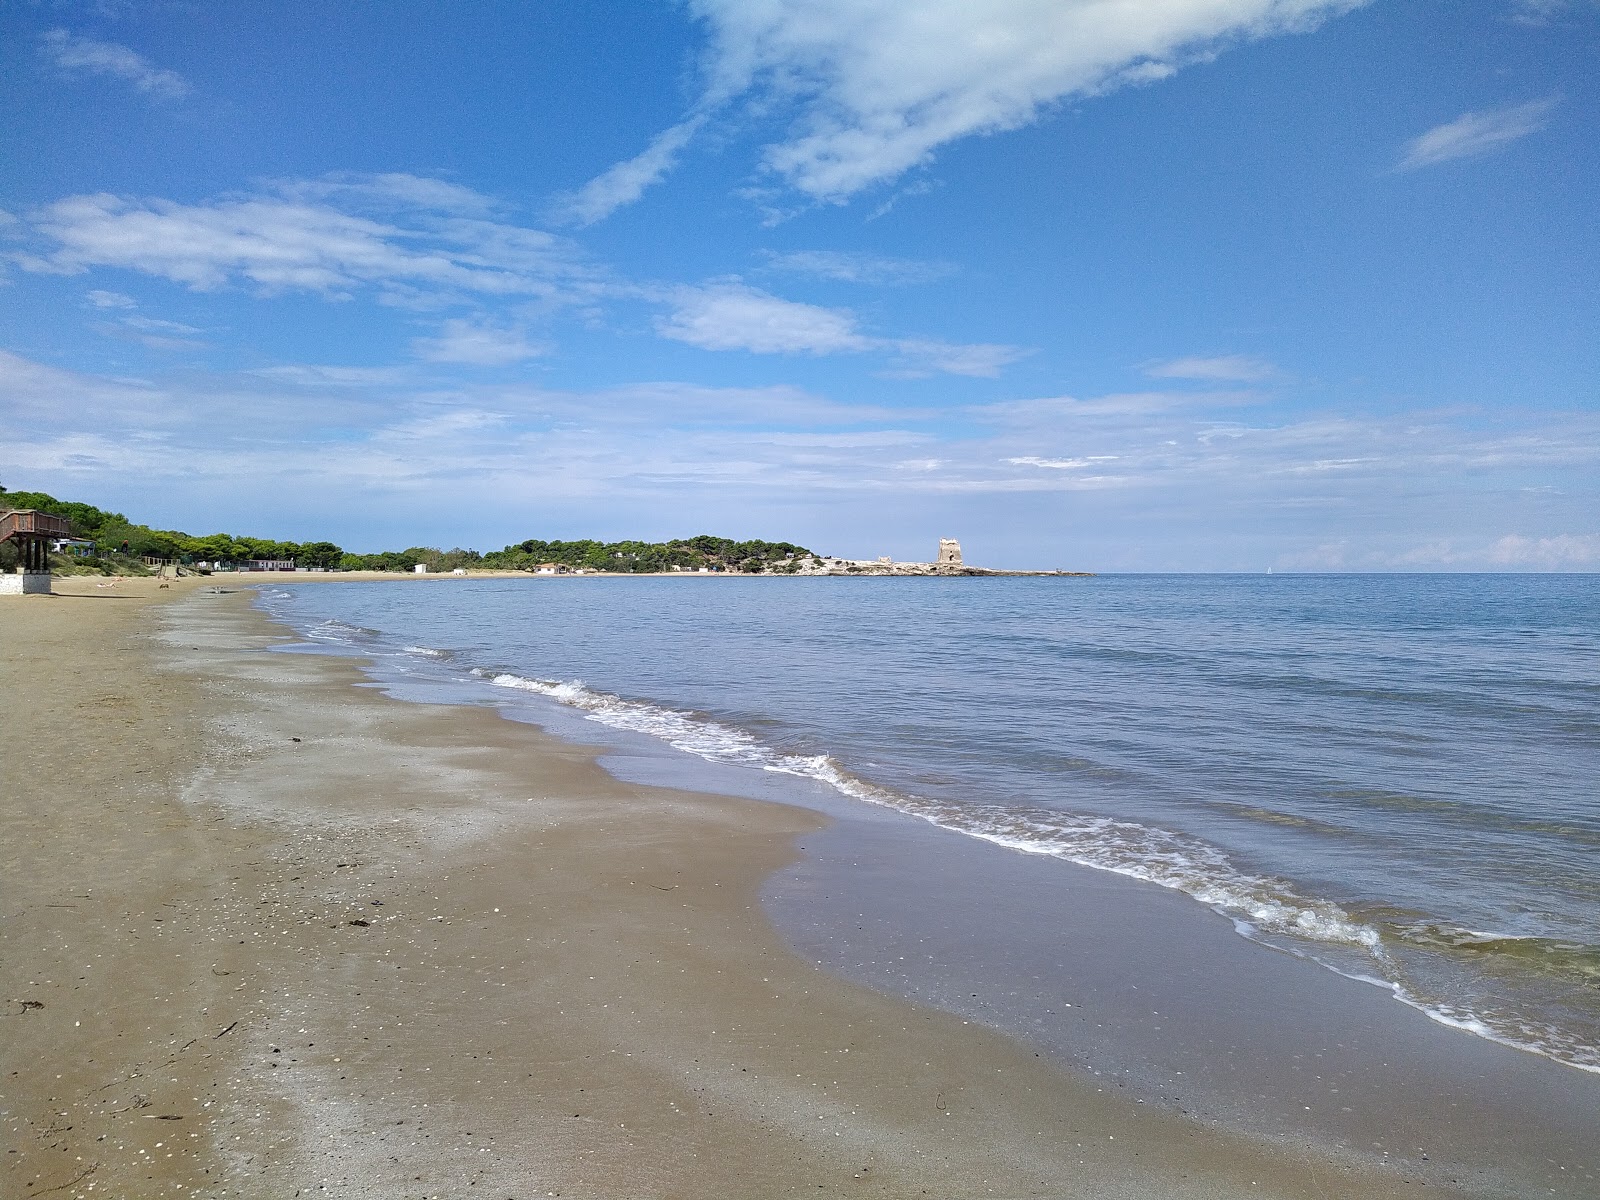 Photo of Spiaggia di Sfinale - popular place among relax connoisseurs